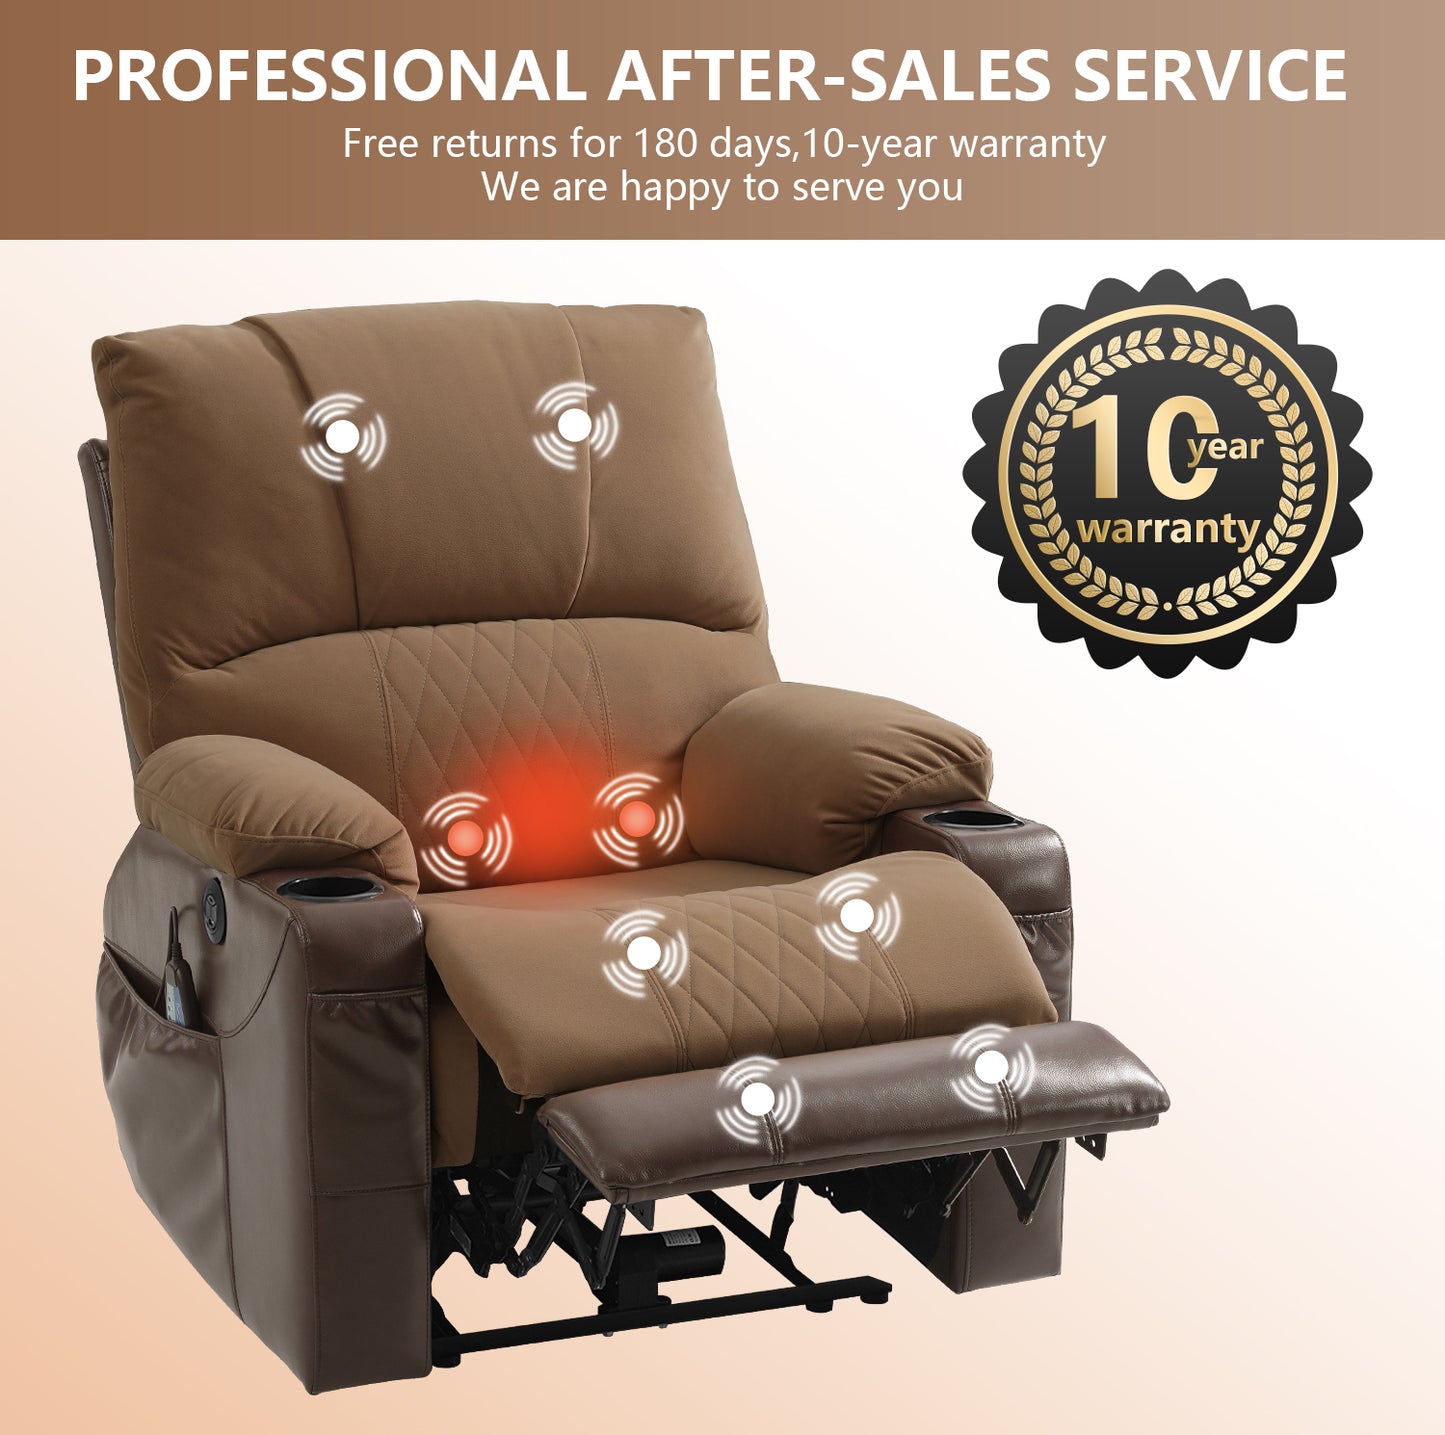 Power Recliner Chair,Massage Chair Recliner with Massage and Heating Function,Side Pocket Living Room Chair with 2 Cup Holders USB ang Type-C Ports